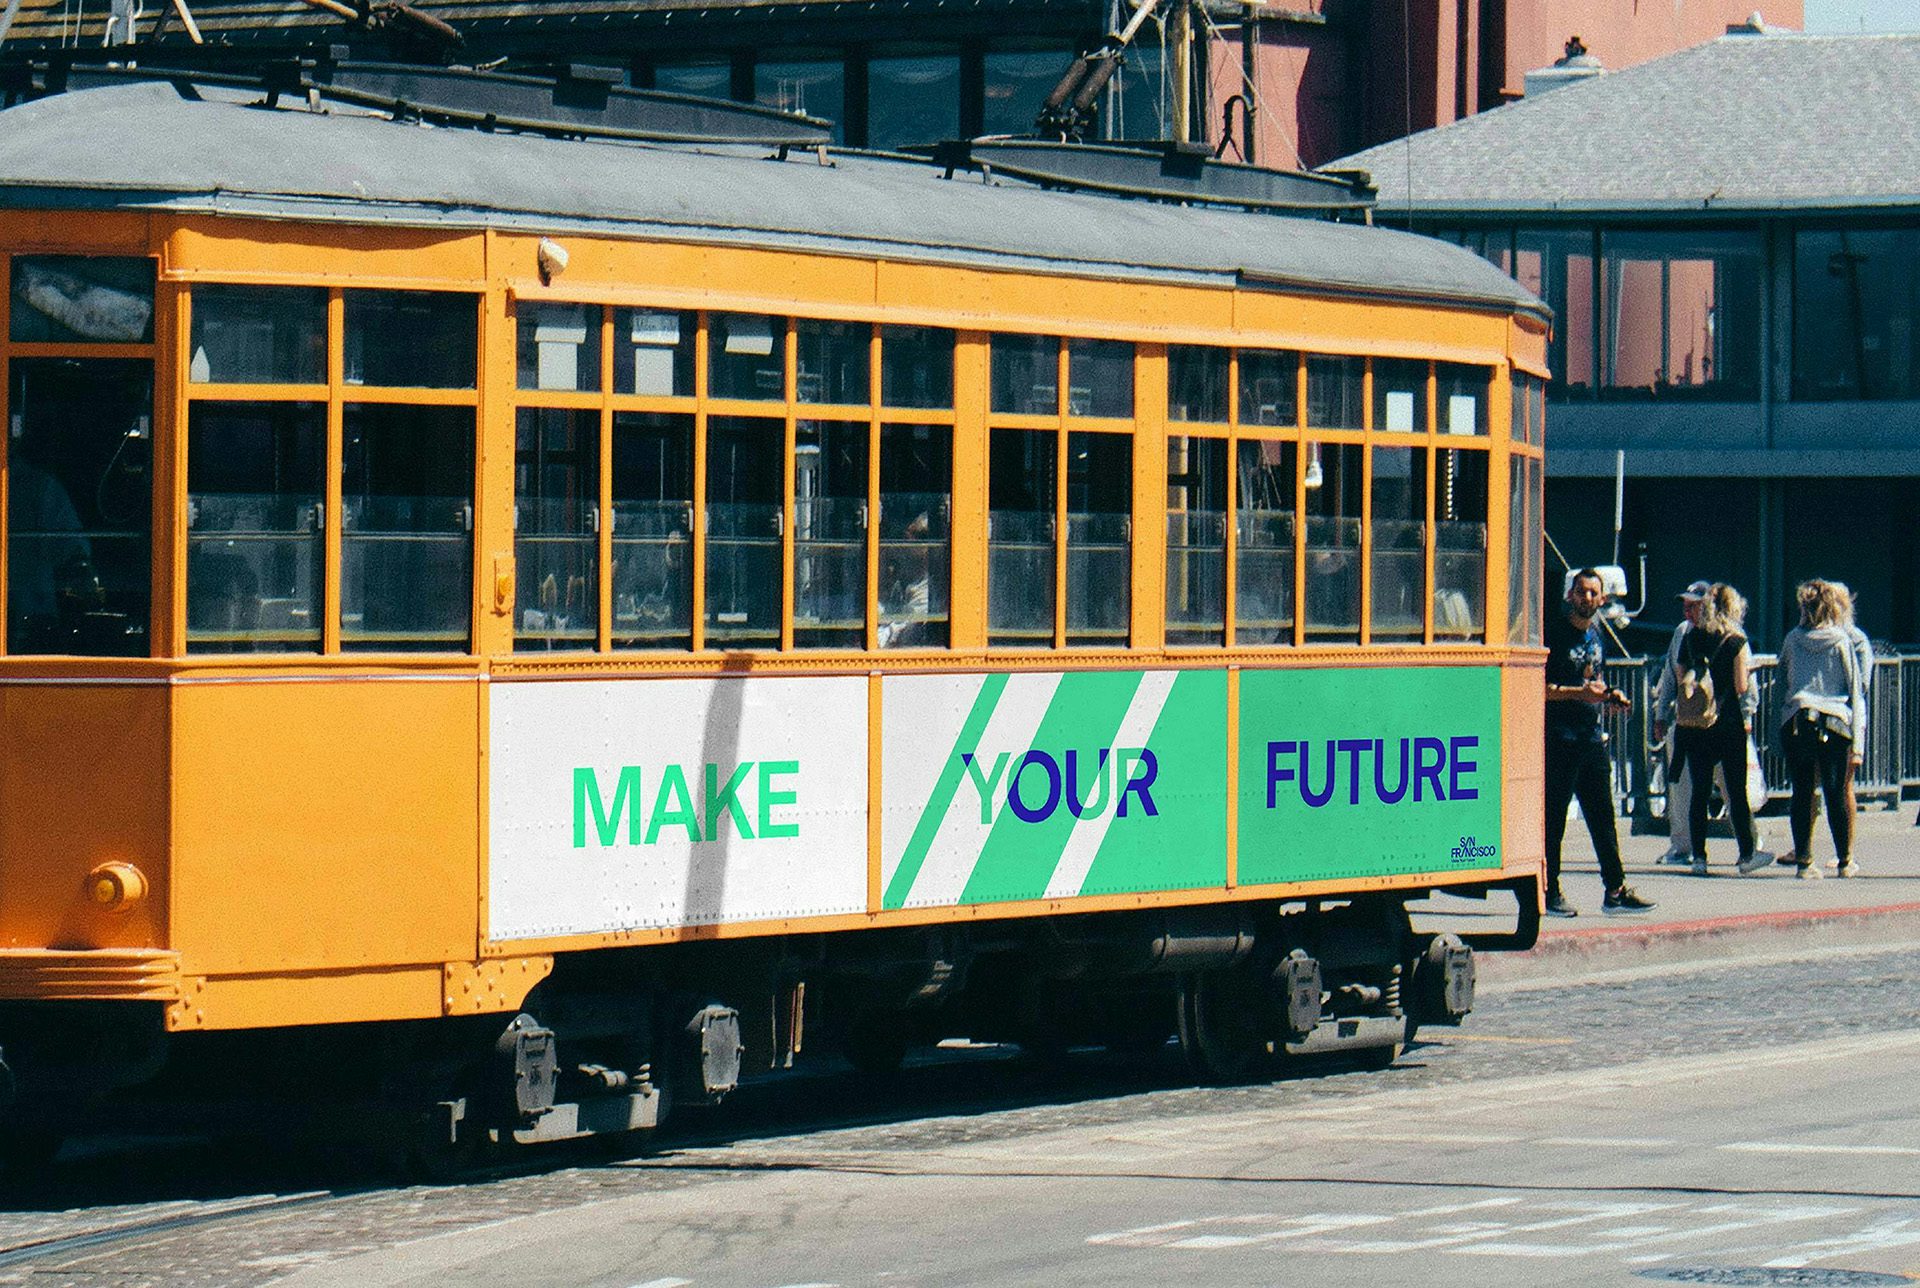 Photograph of a San Francisco tram that reads 'make your future' on a white and green striped background